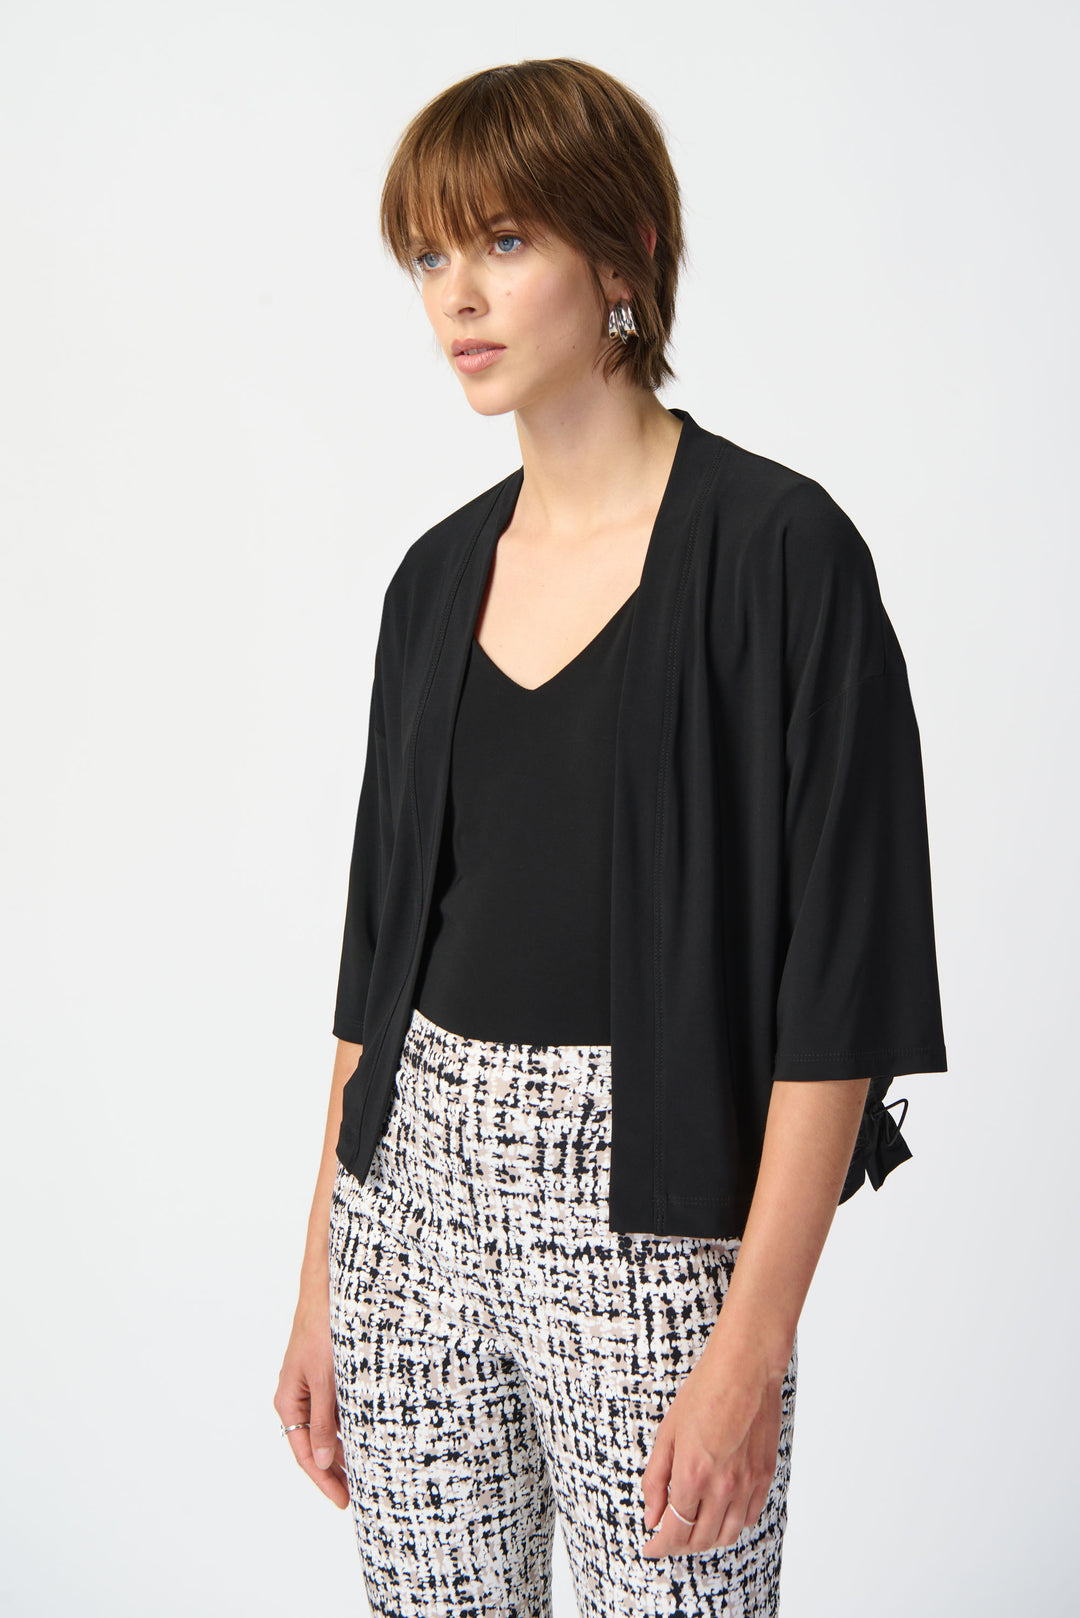 This cropped open cardigan doubles as a top and features a sleek, contrasting memory fabric back for a modern twist. Its light and relaxed fit adds an effortless touch to any outfit.